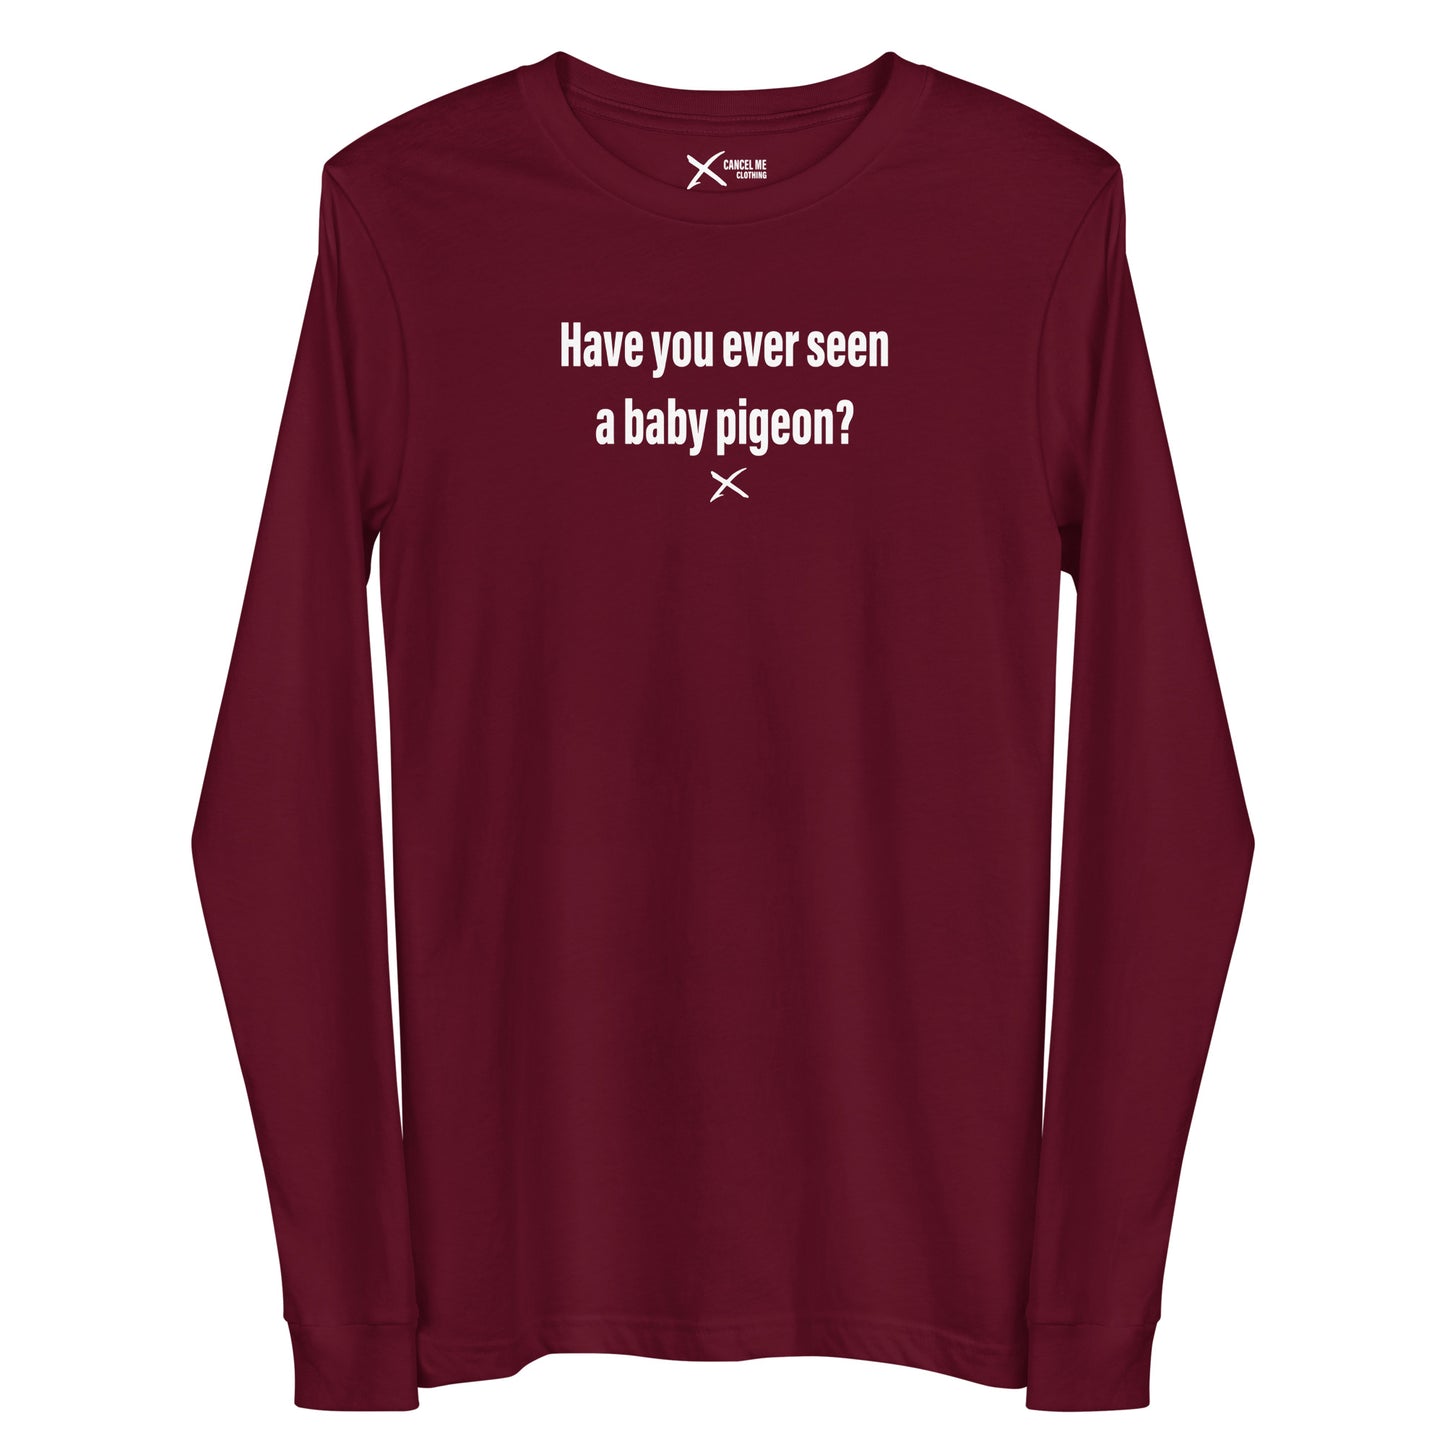 Have you ever seen a baby pigeon? - Longsleeve